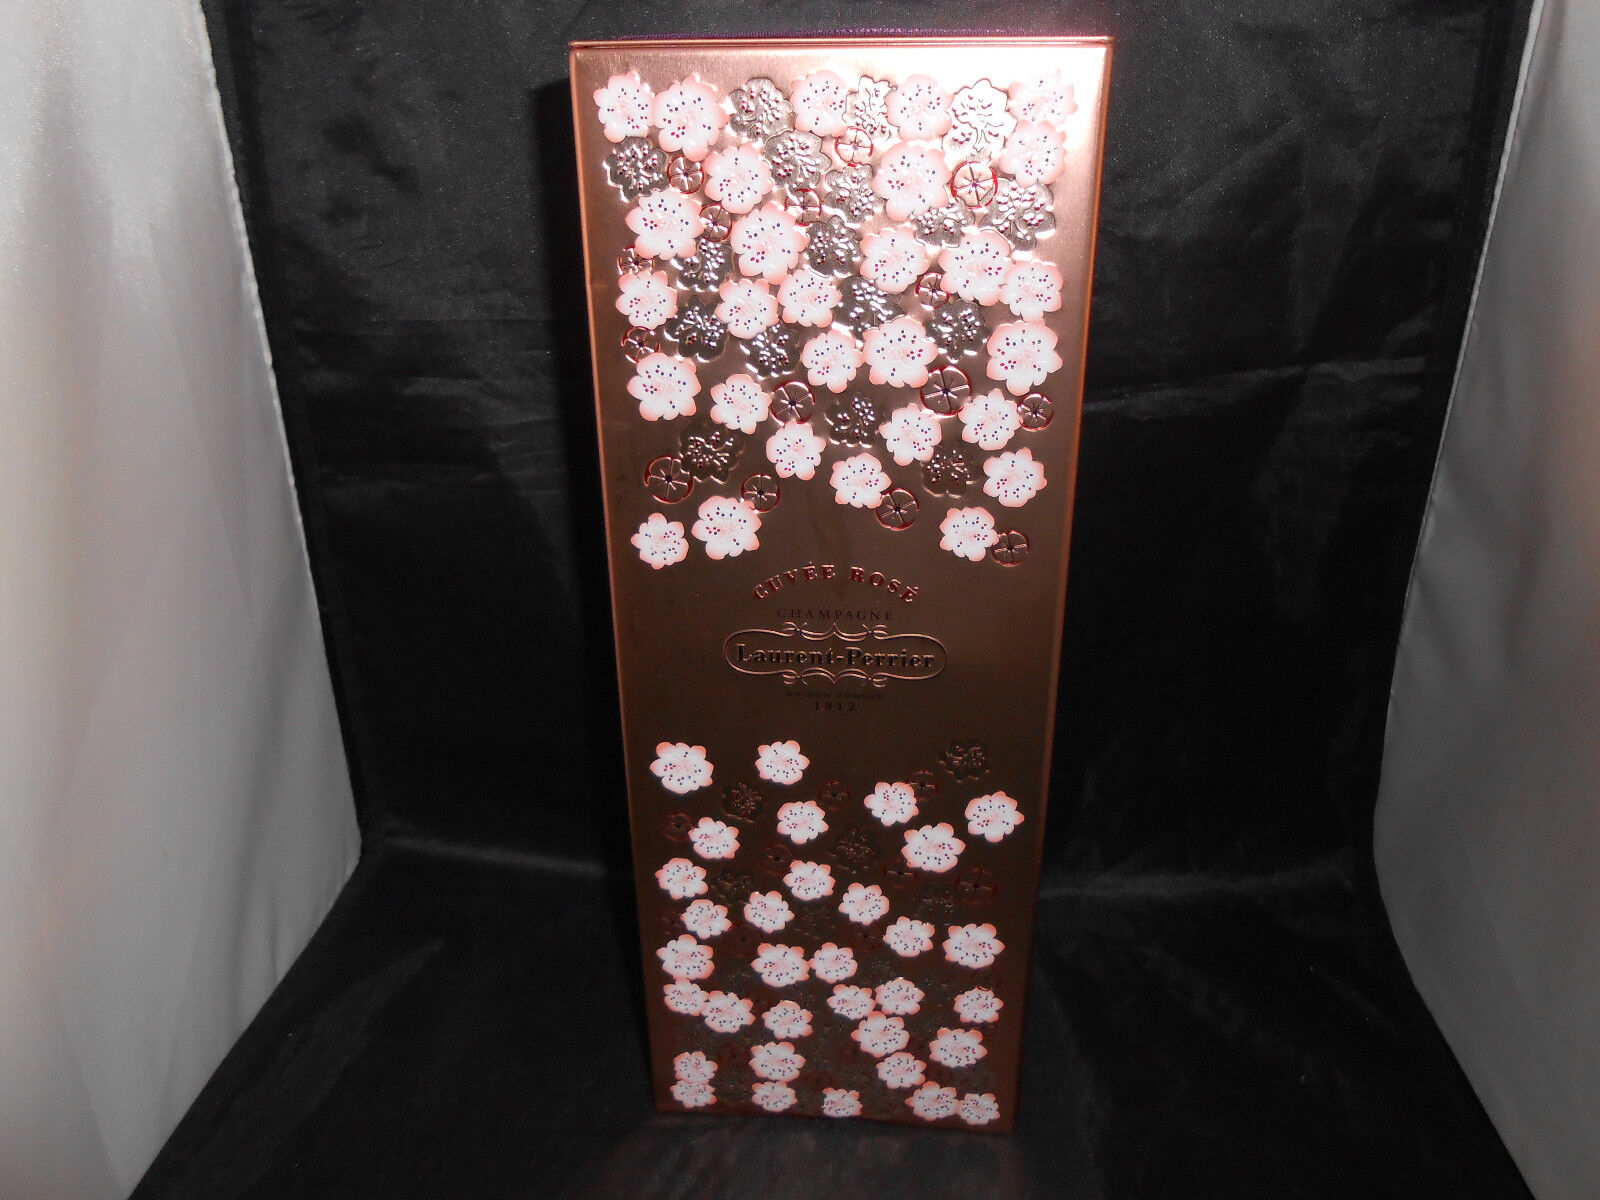 LAURENT-PERRIER CUVEE ROSE COLLECTORS DISPLAY TIN RARE COLLECTIBLE BOX CHAMPAGNE